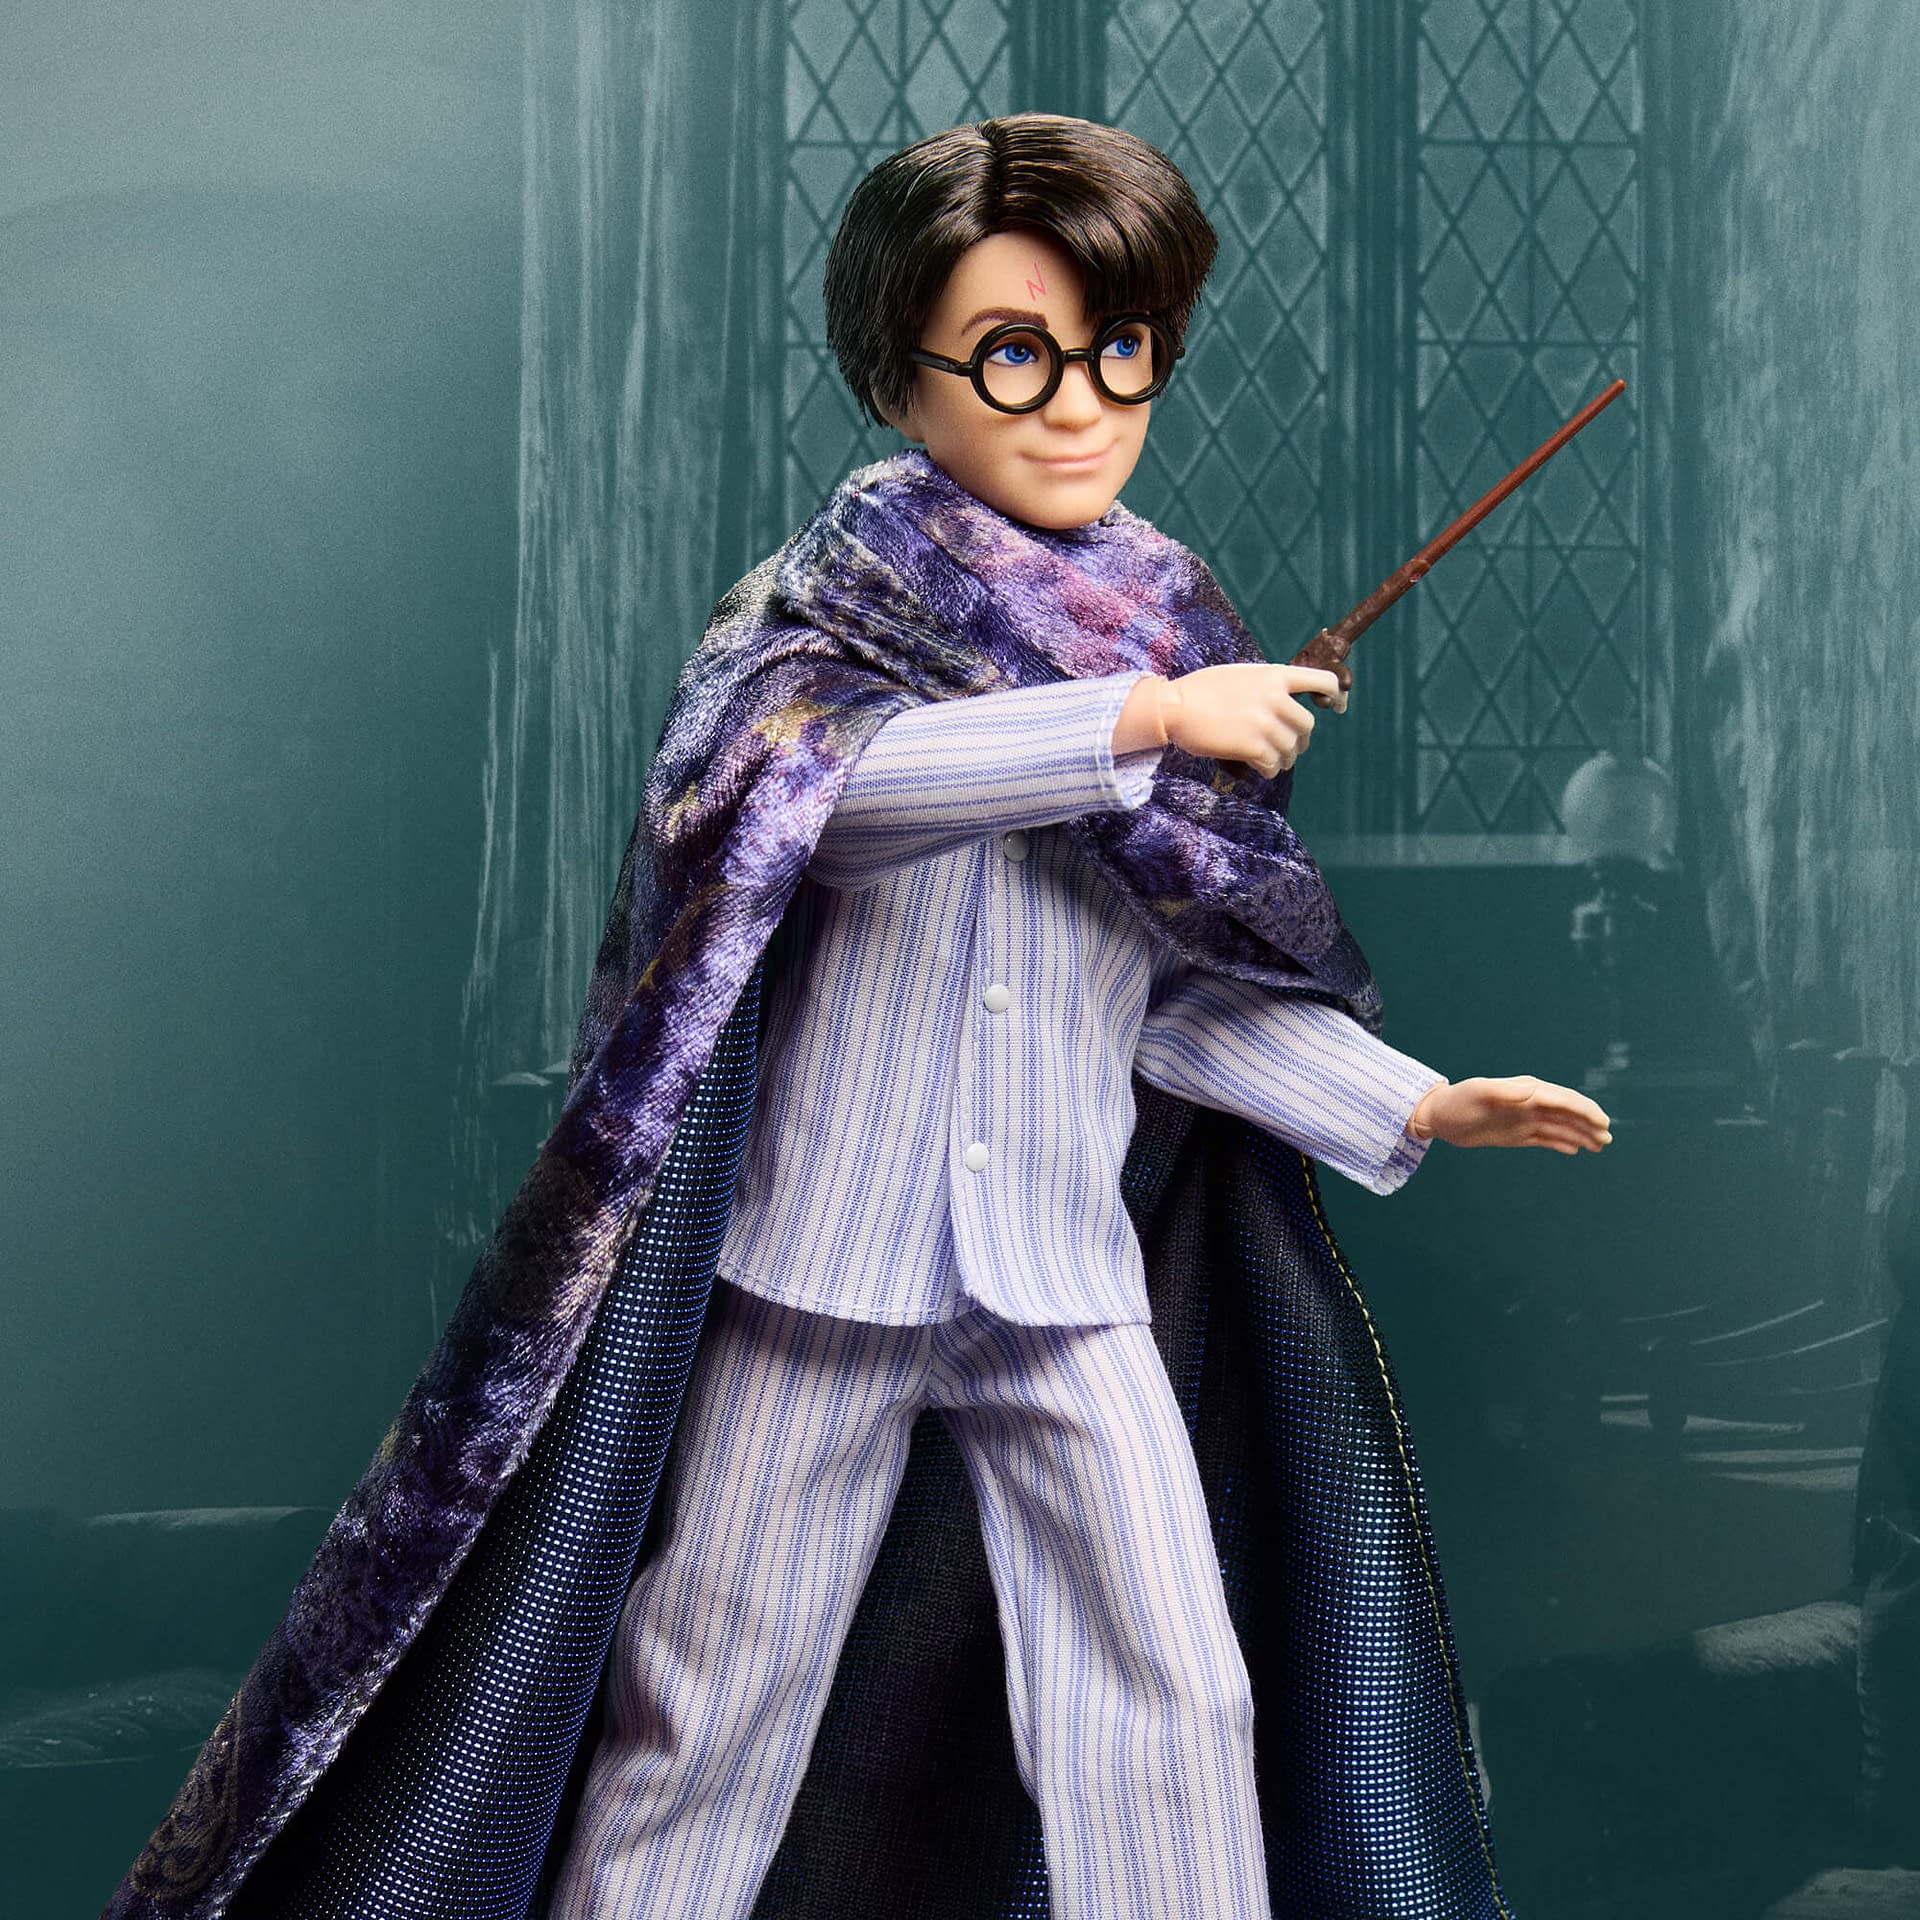 Mattel Casts a Spell with New Harry Potter Doll Design Collection